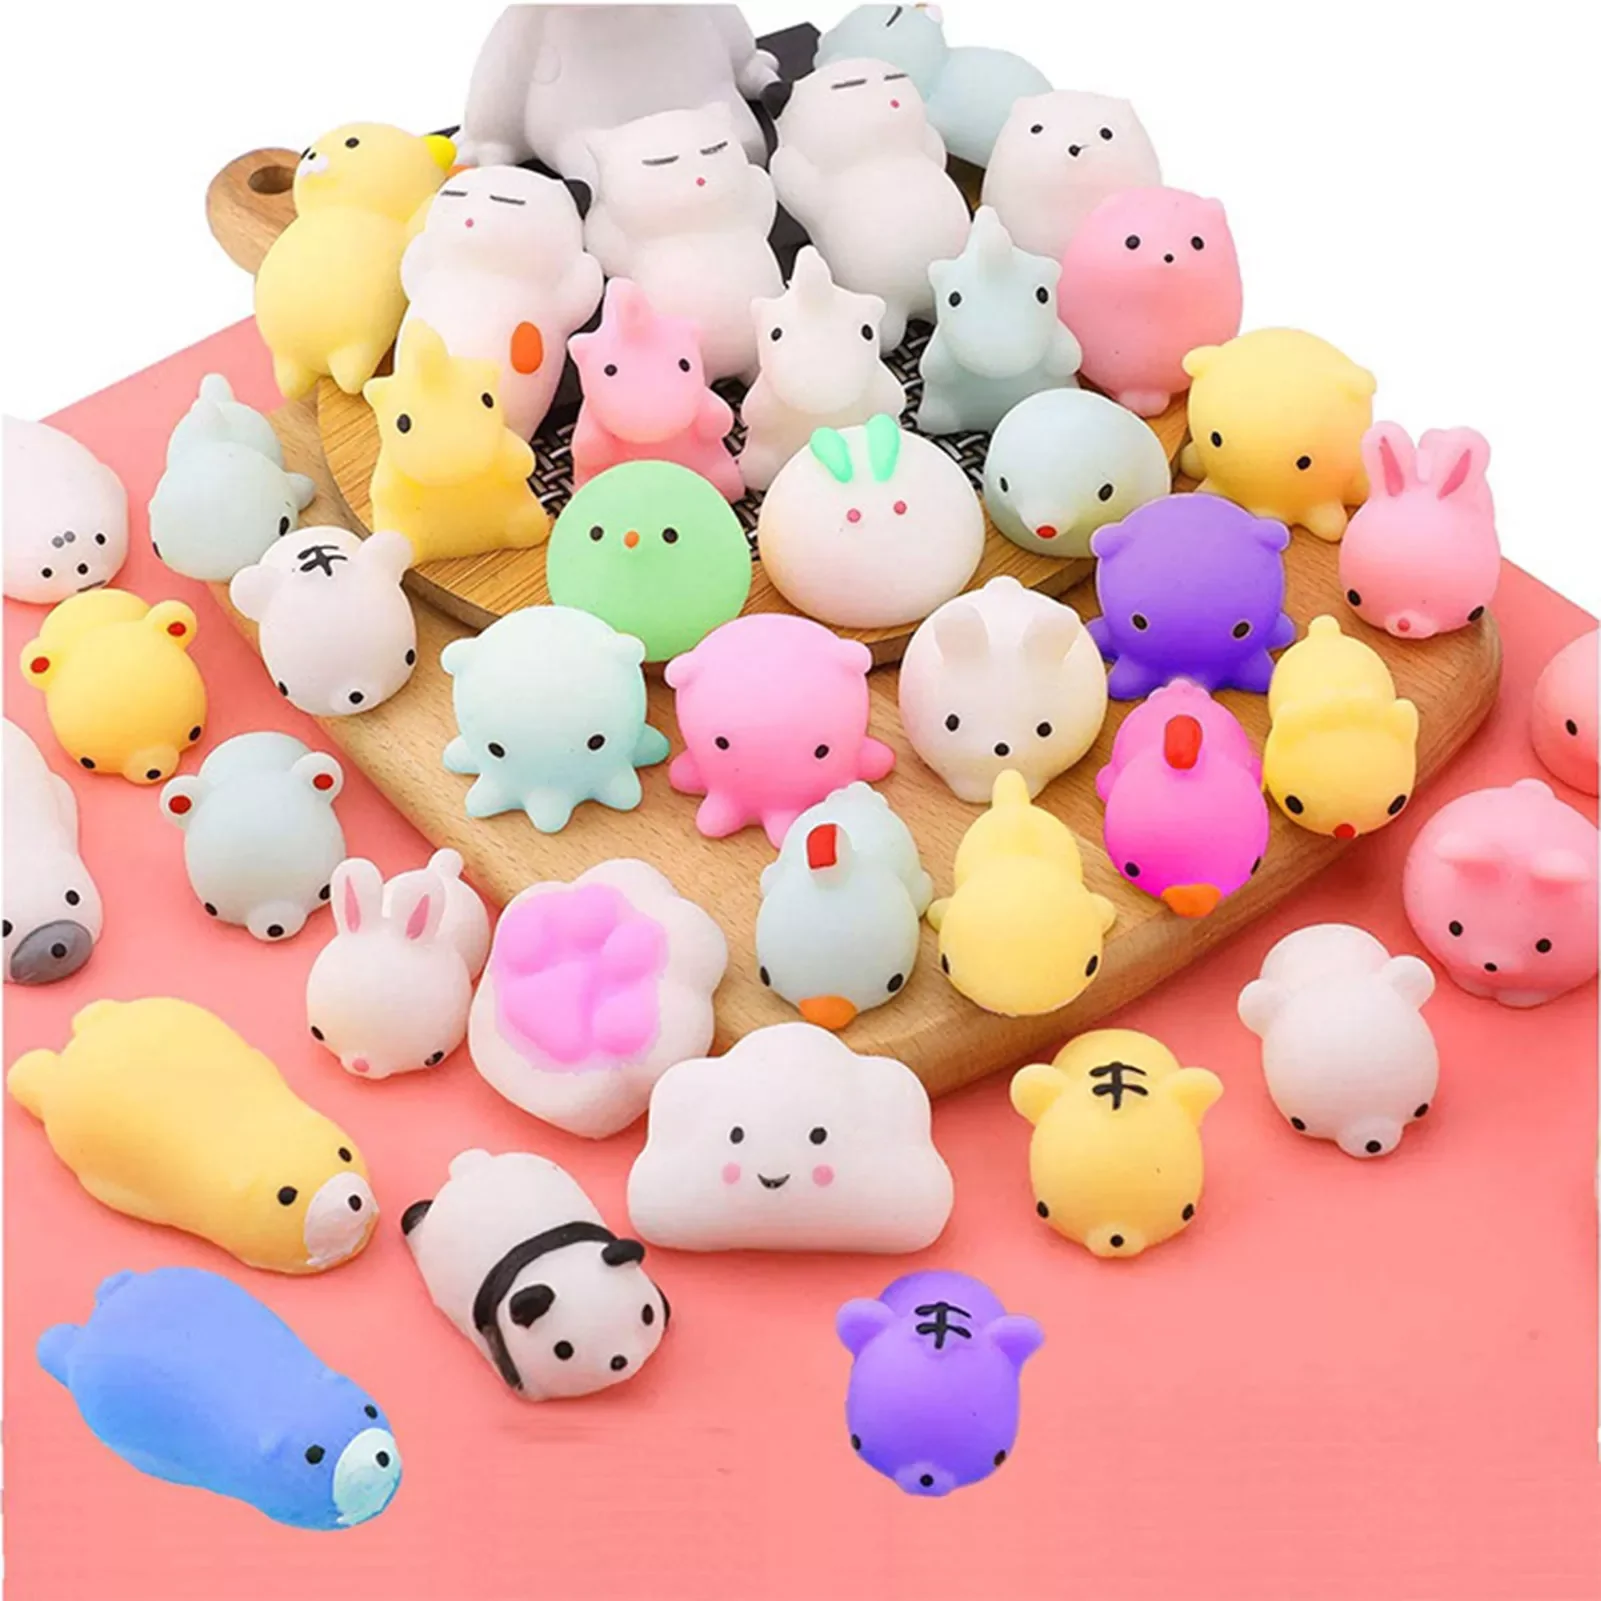 

50PCS Kawaii Squishy Toy Cute Animal Antistress Ball Squeeze Mochi Rising Toys Abreact Soft Sticky Stress Relief Toys Funny Gift